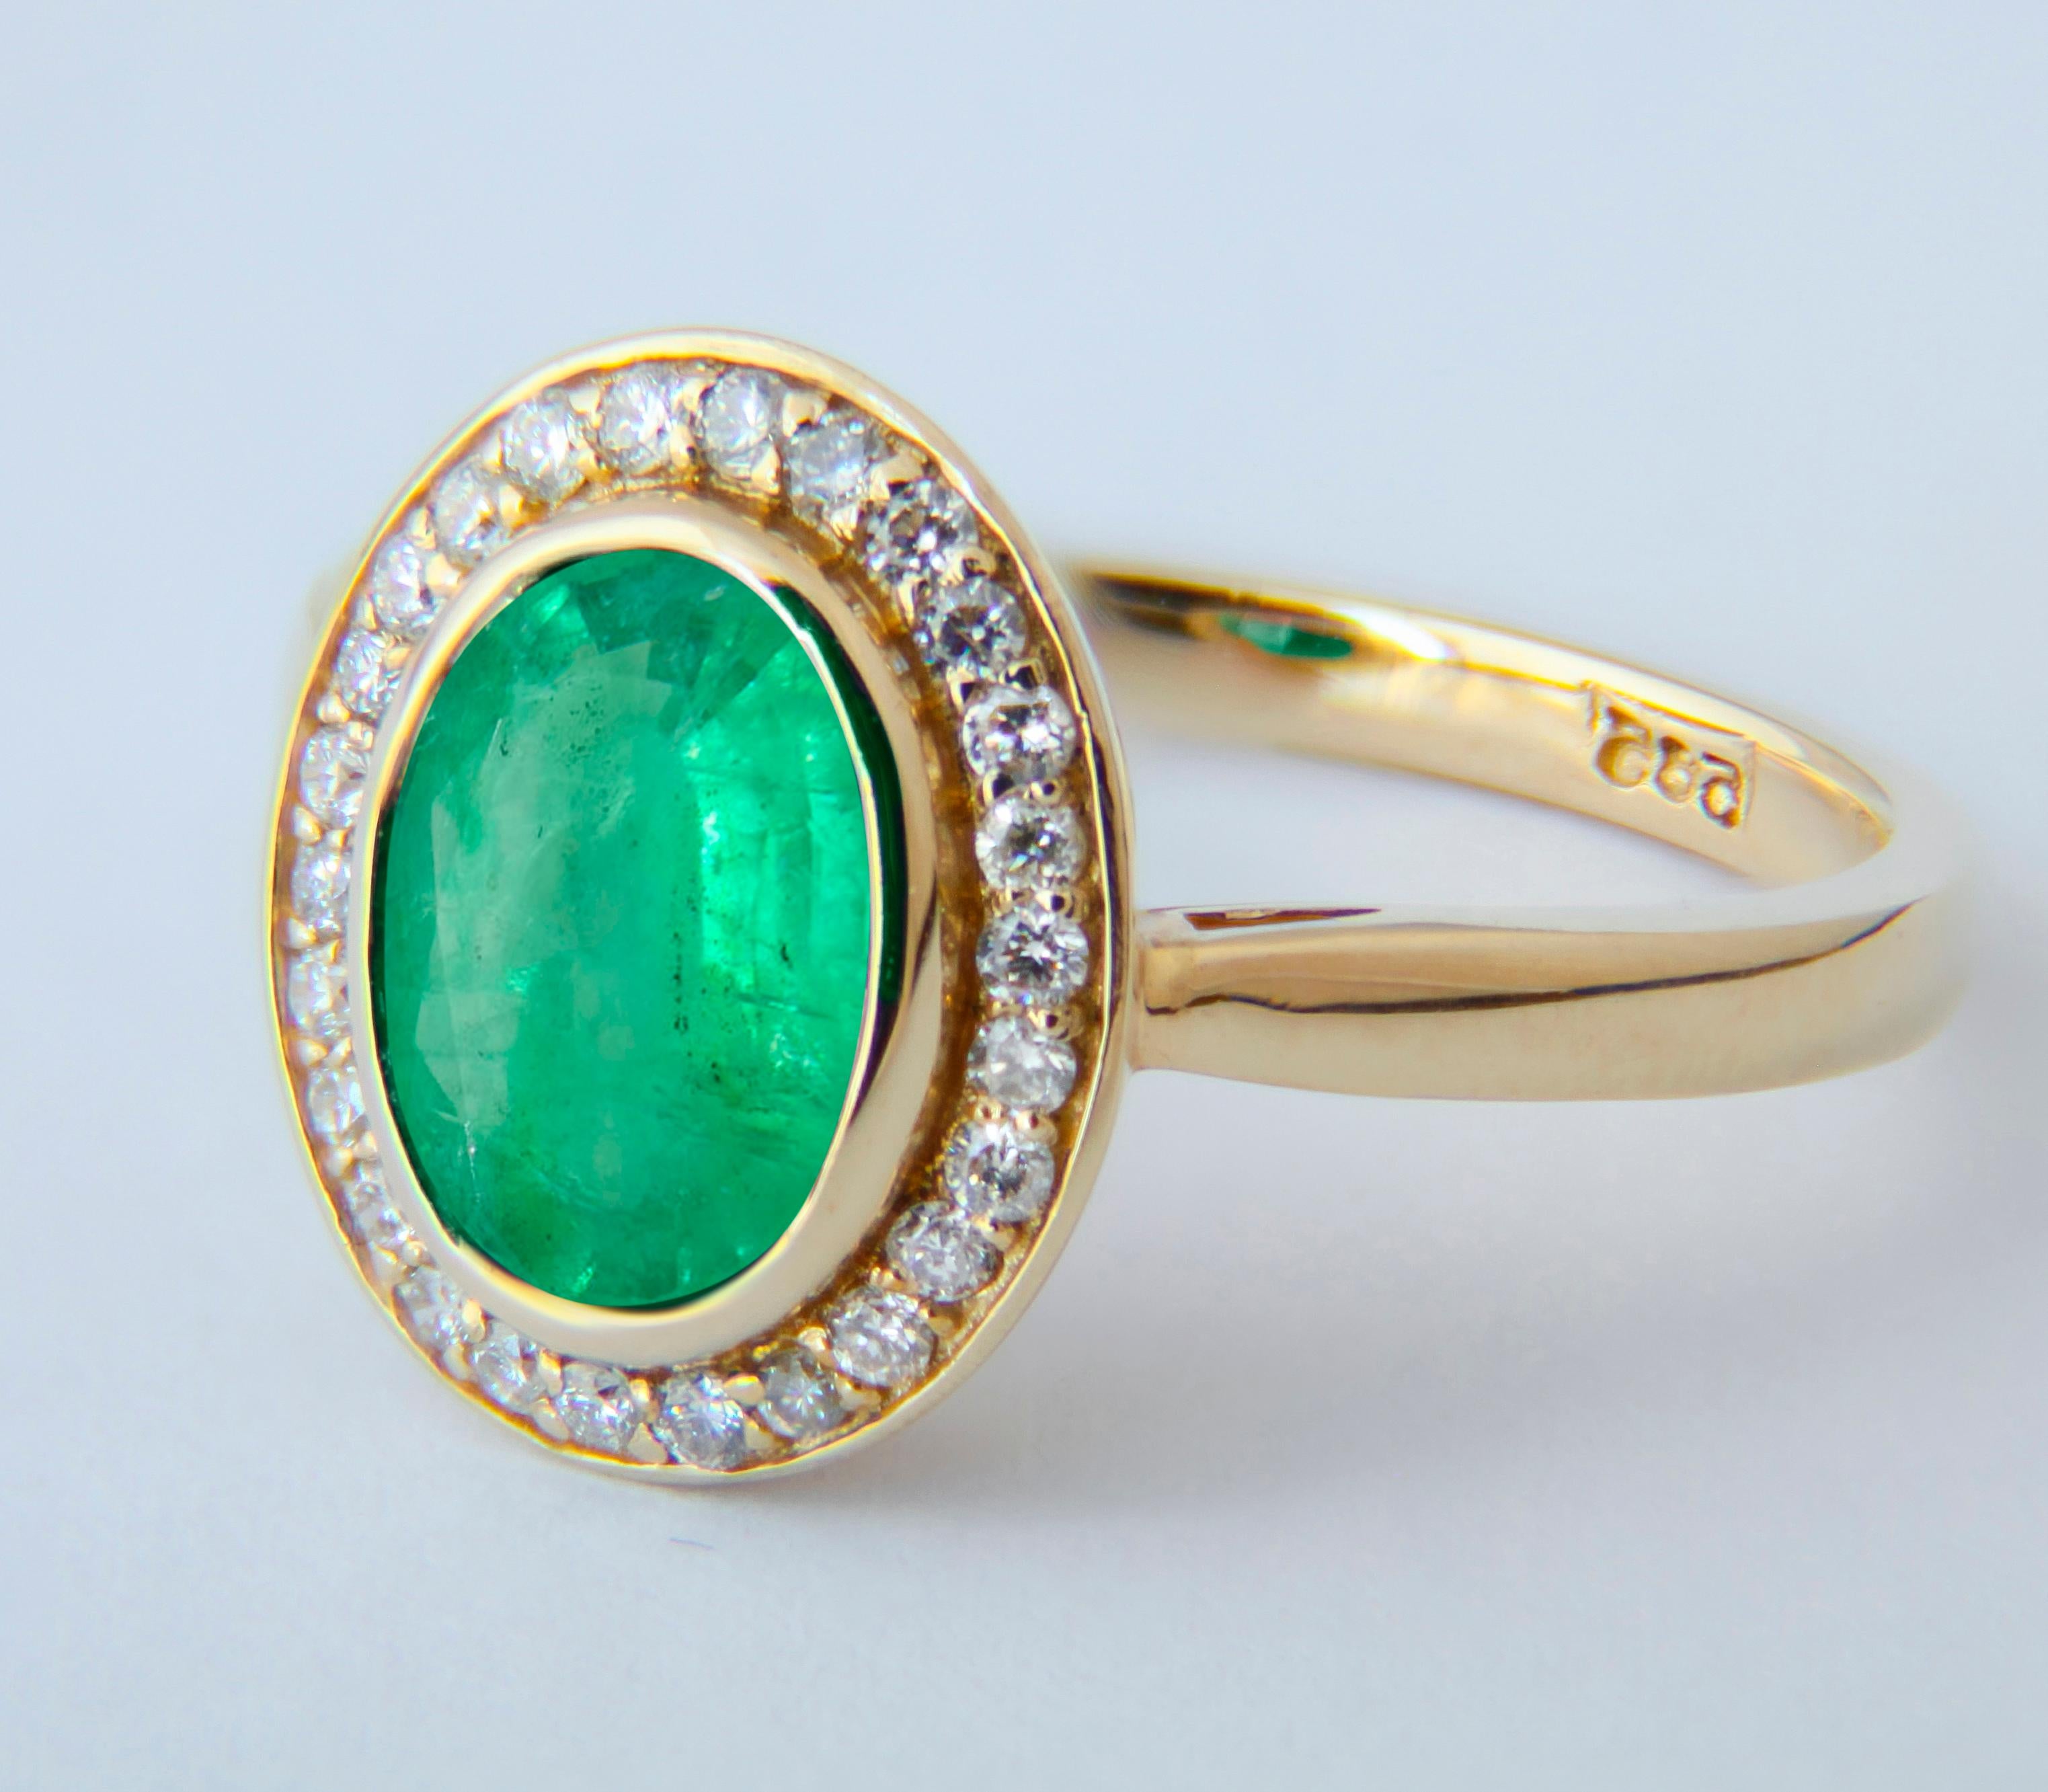 For Sale:  Emerald and diamonds 14k gold ring. 7